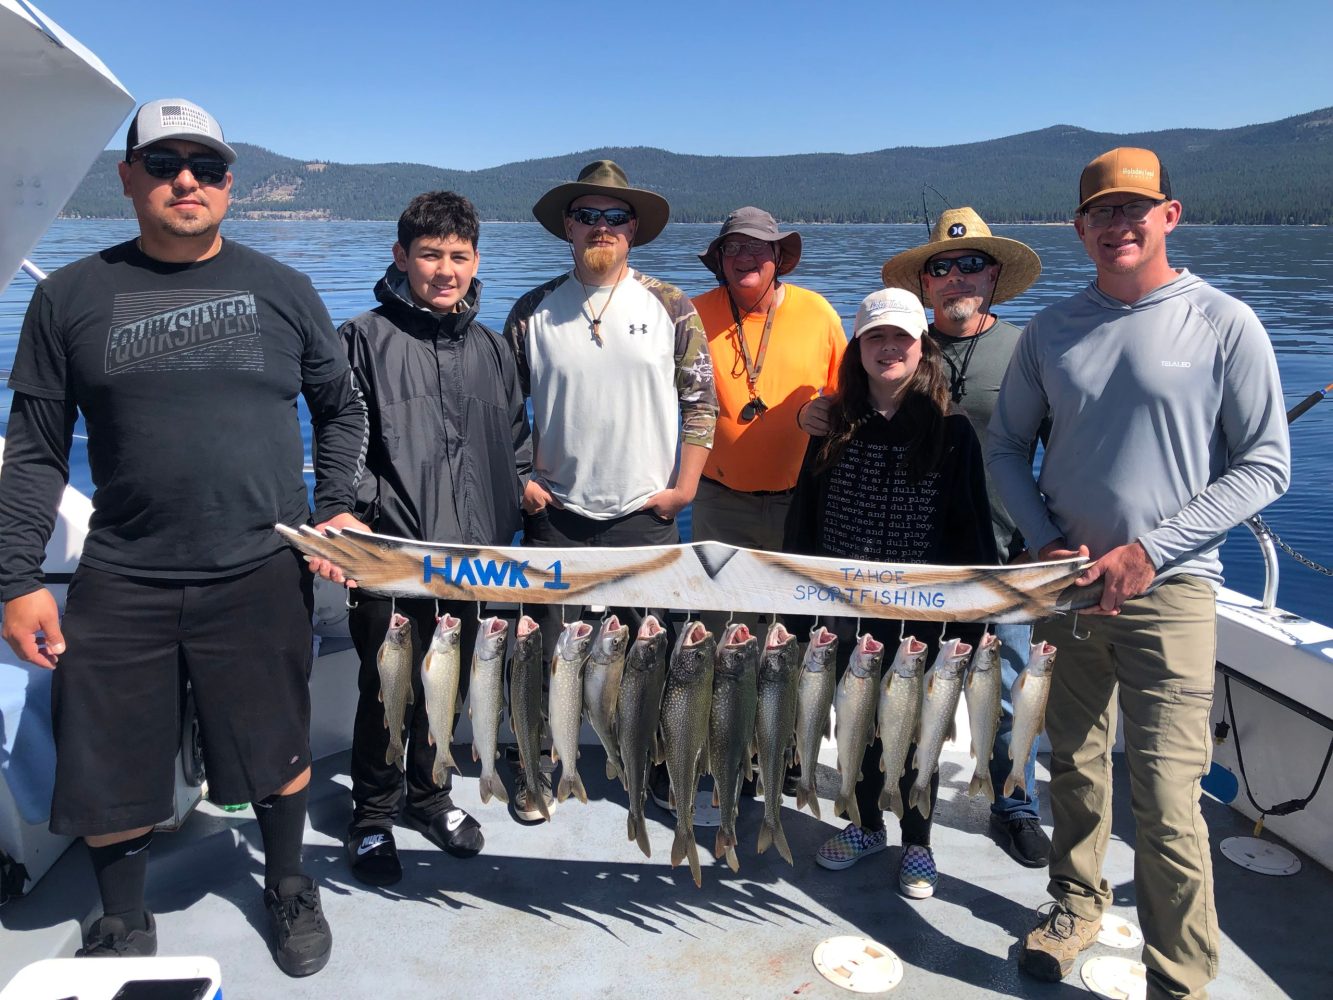 Captain Zach's Crew Shows of Their Fish Catches